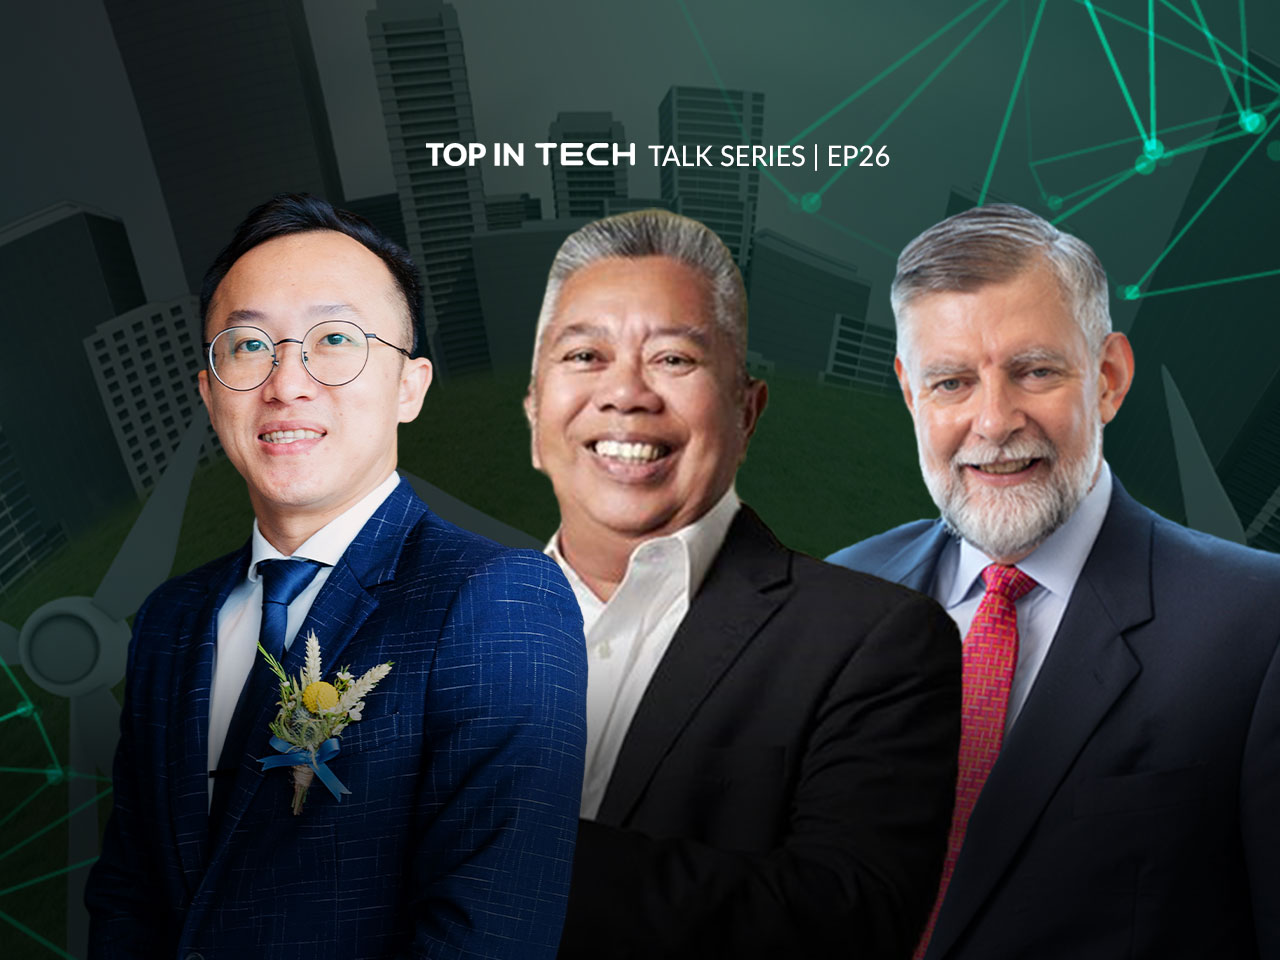 Top In Tech: Green Wash or Green Tech? - Is solar nice to have or a must have in Malaysia’s energy mix?